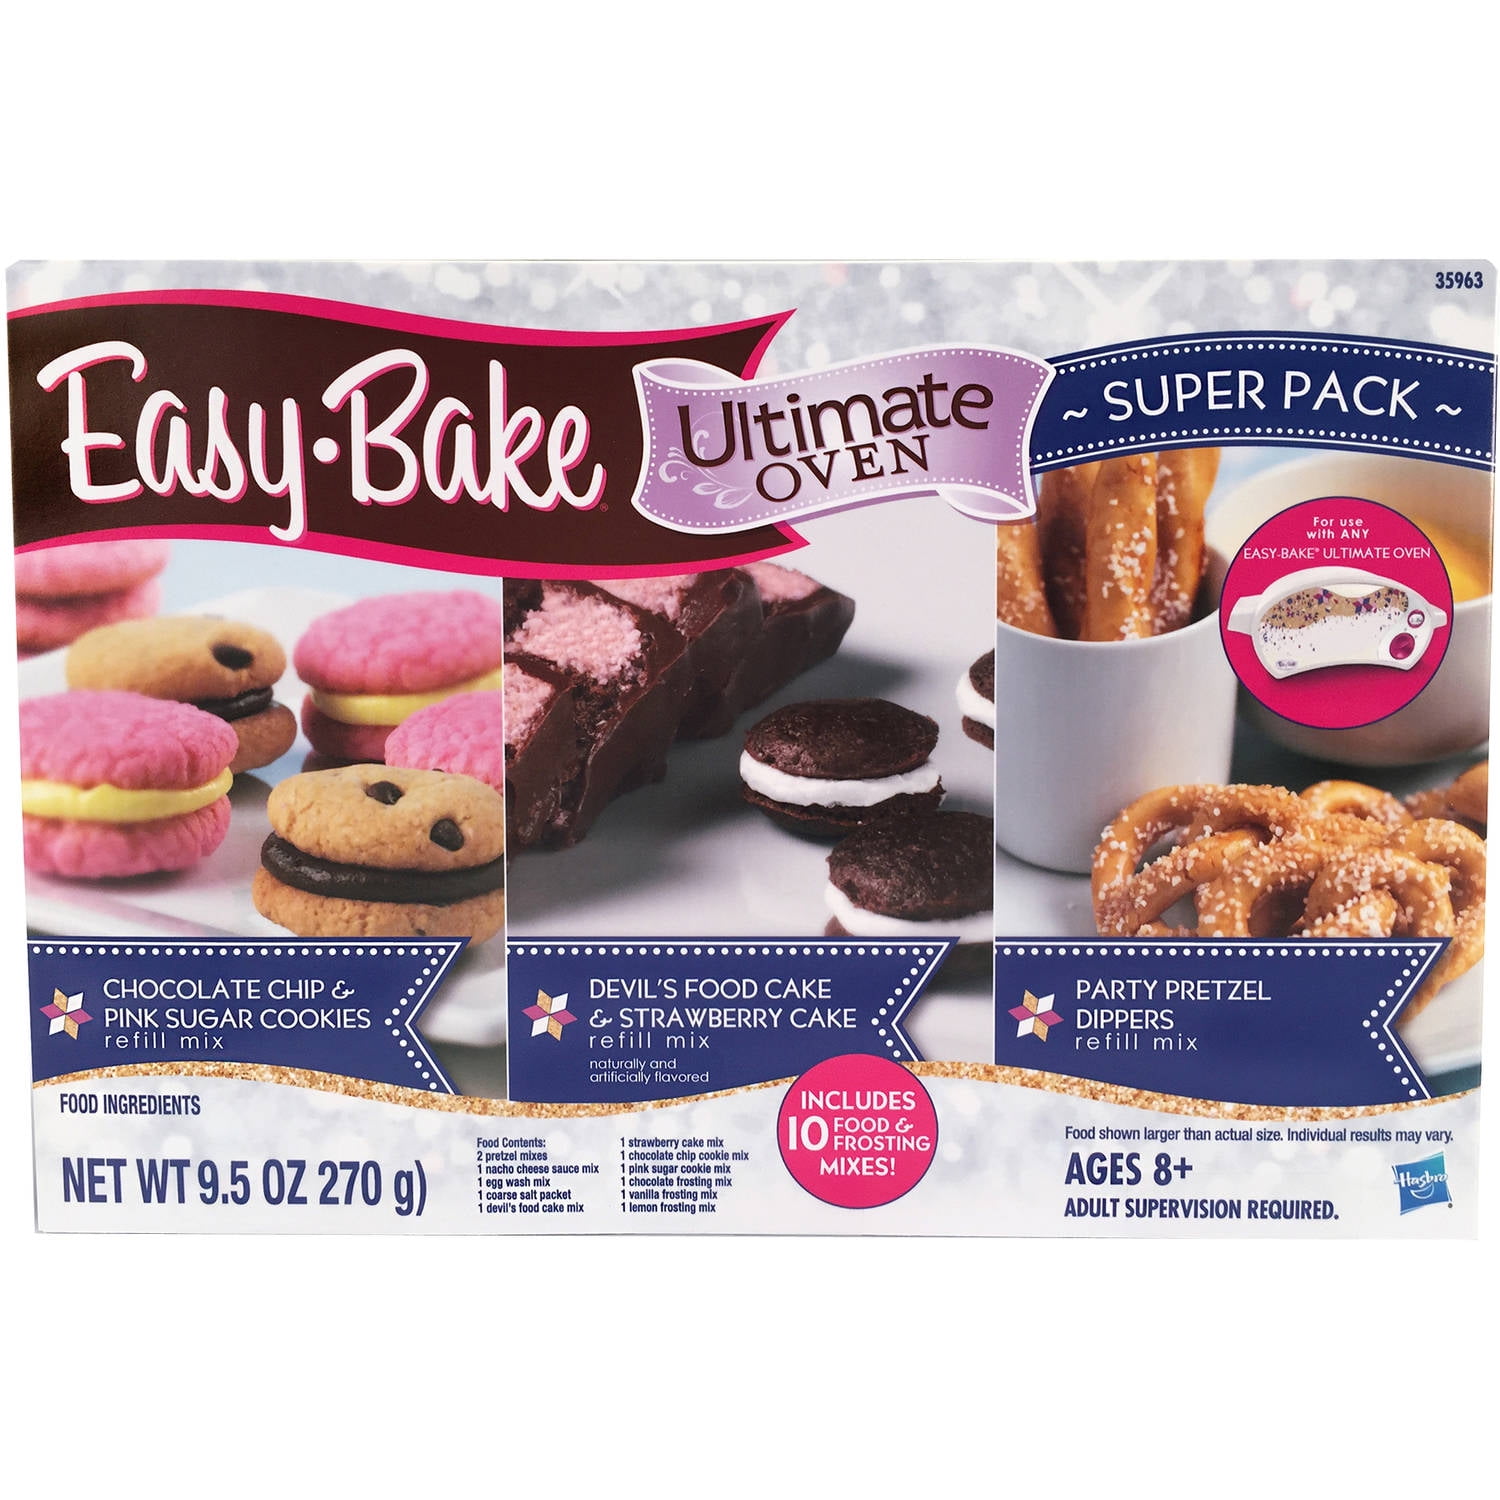 Easy Bake Refill Super Pack Oven Mix 10 Mixes Hasbro Ultimate Cookies Cake for sale online 